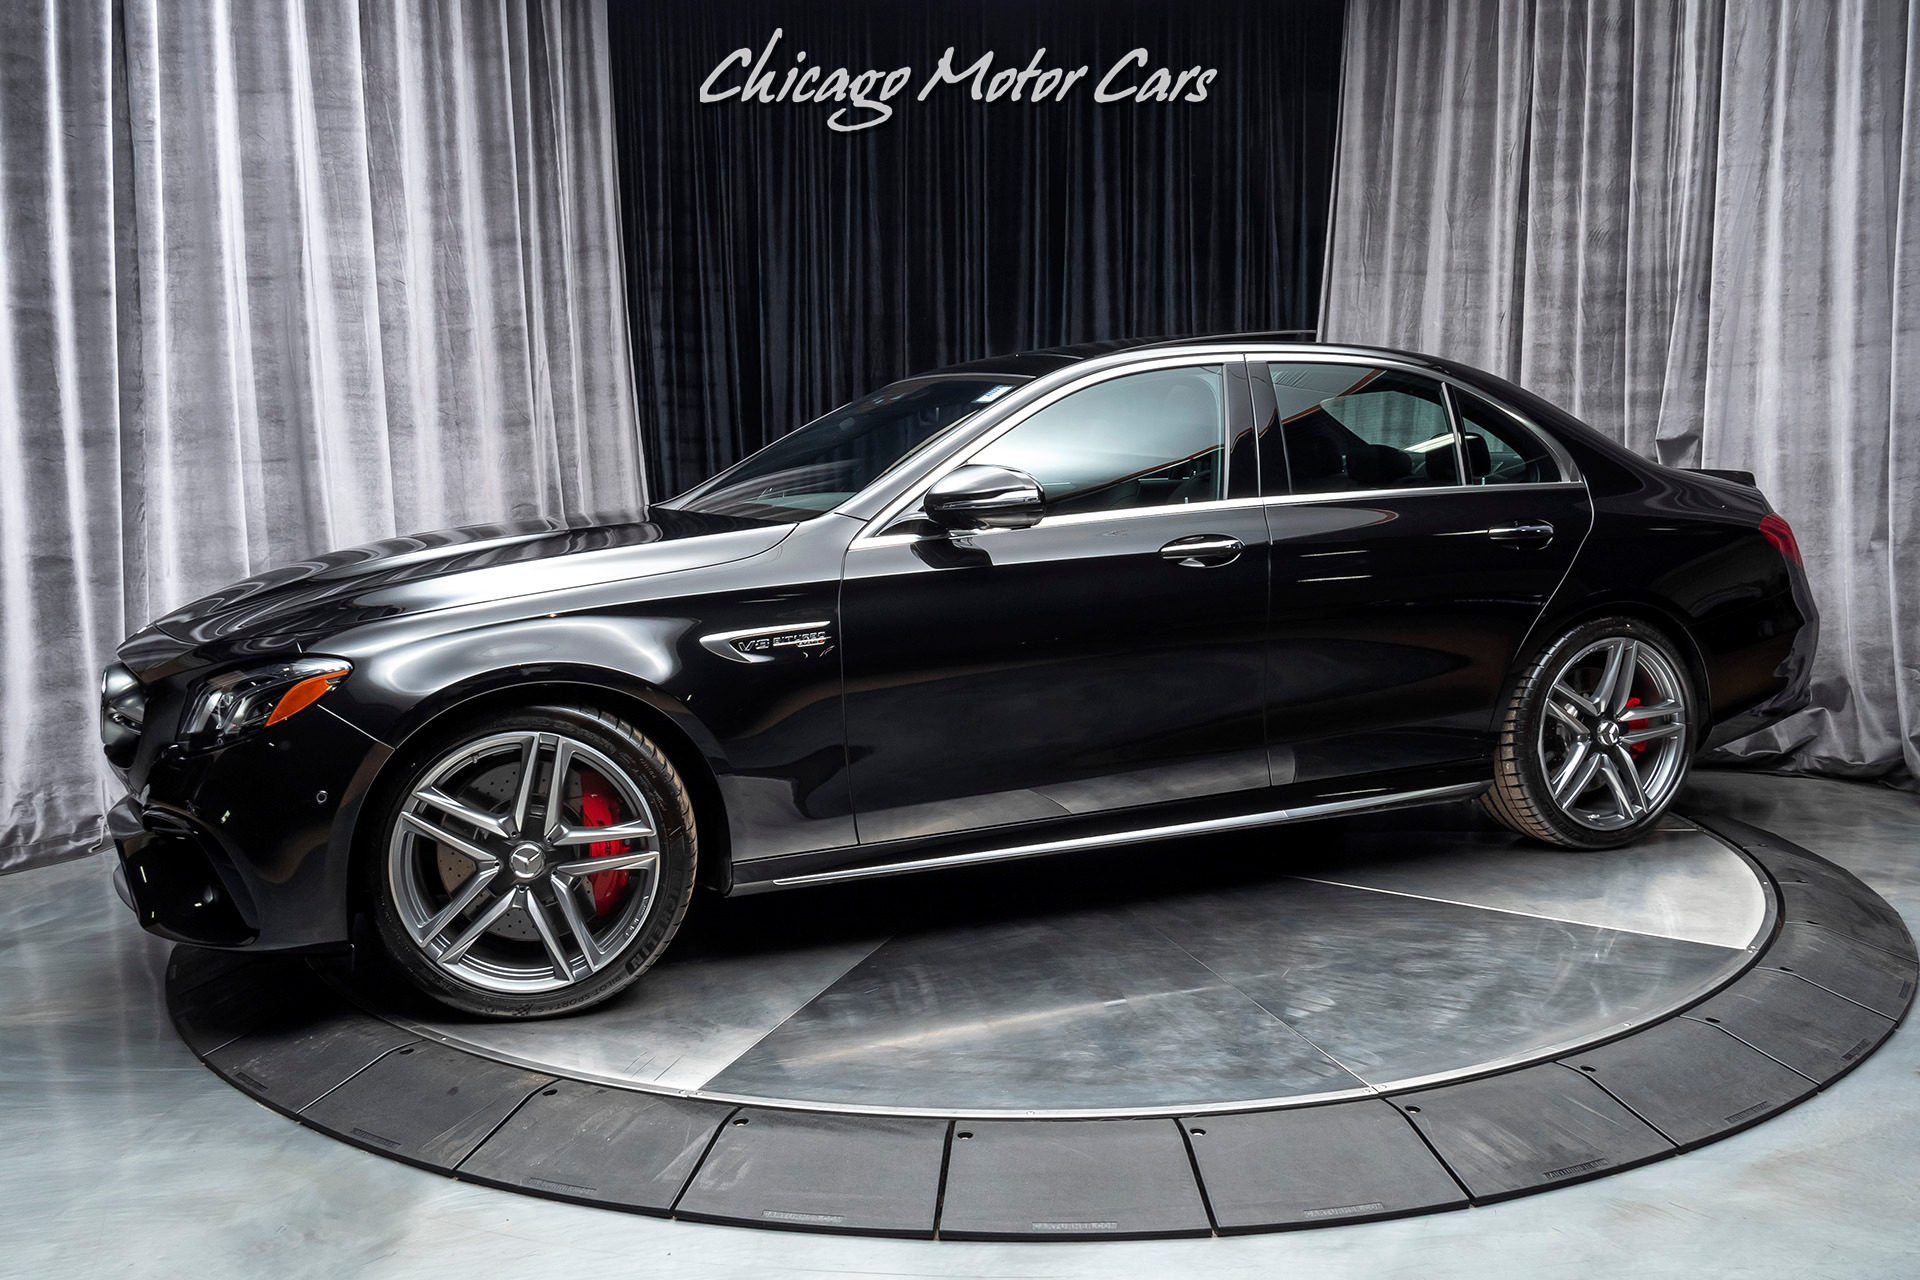 Used-2019-Mercedes-Benz-E63-AMG-S-4Matic-Sedan-MSRP-125K-LOADED-WITH-OPTIONS